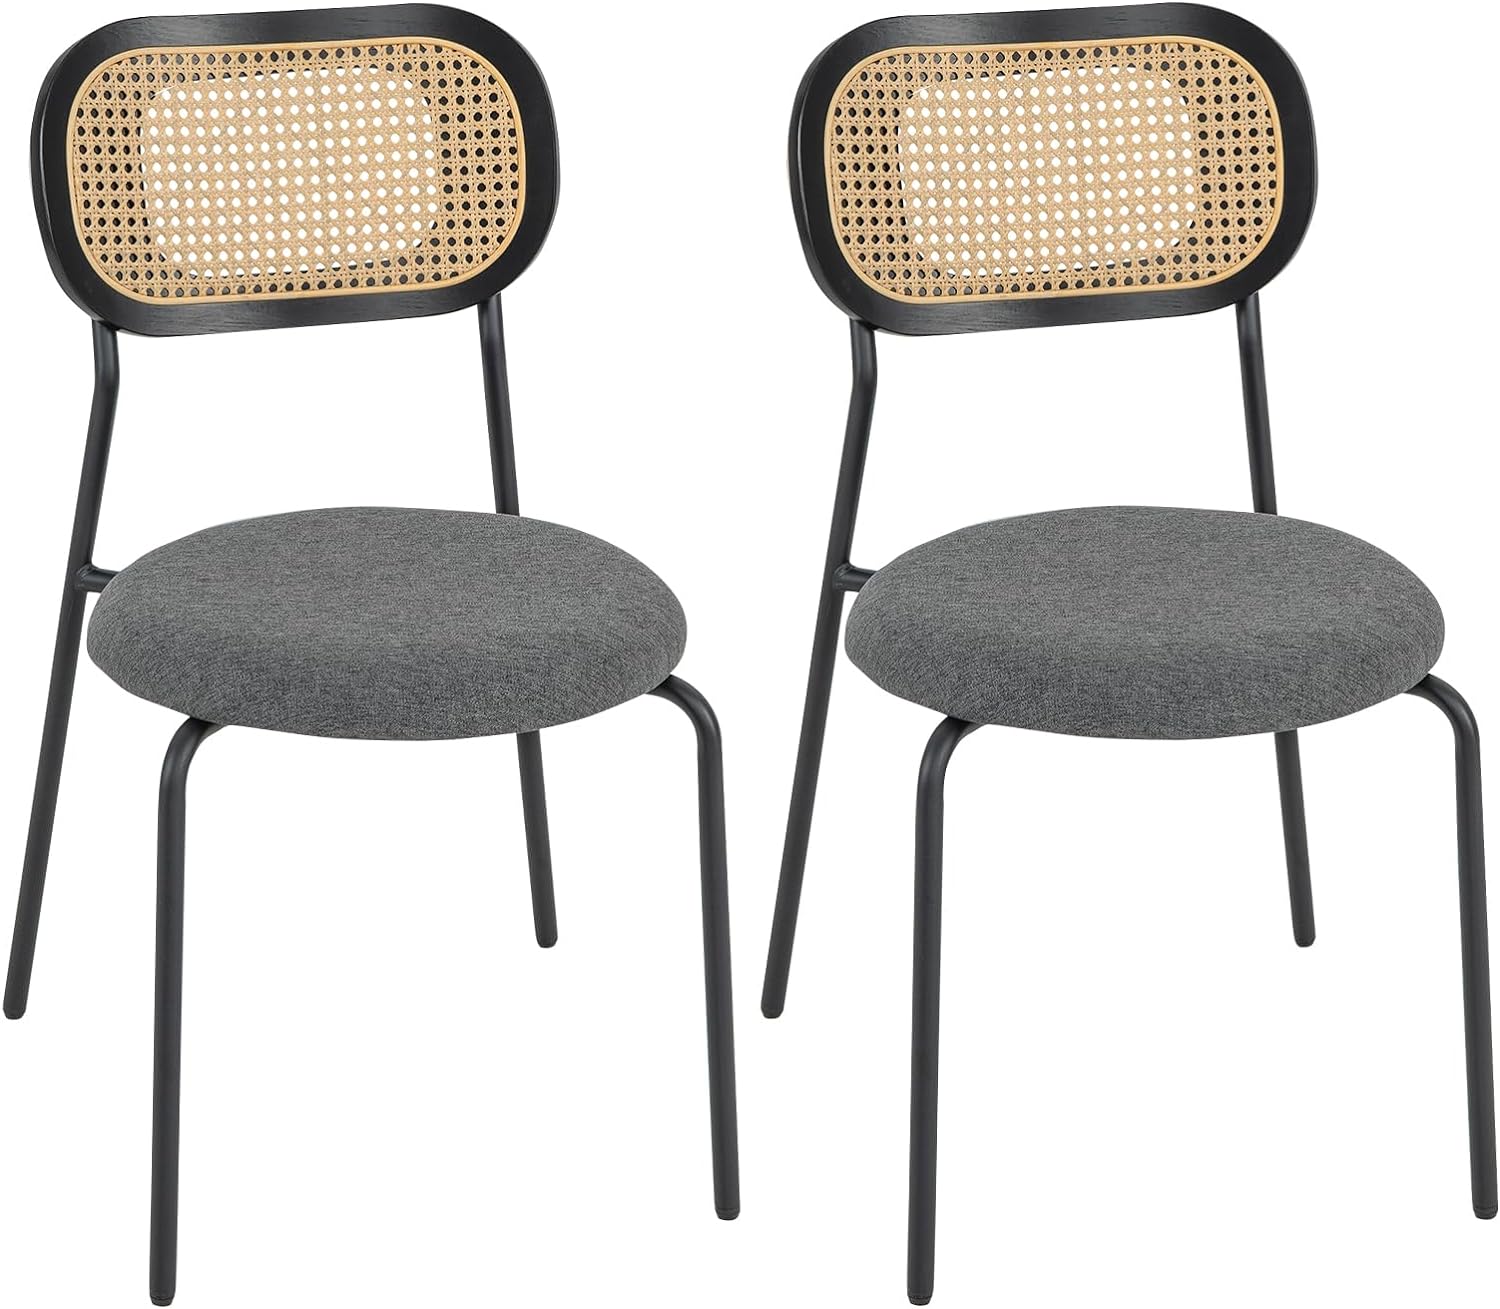 Giantex Rattan Dining Chair Set of 2, Upholstered Side Dining Chairs with Metal Legs